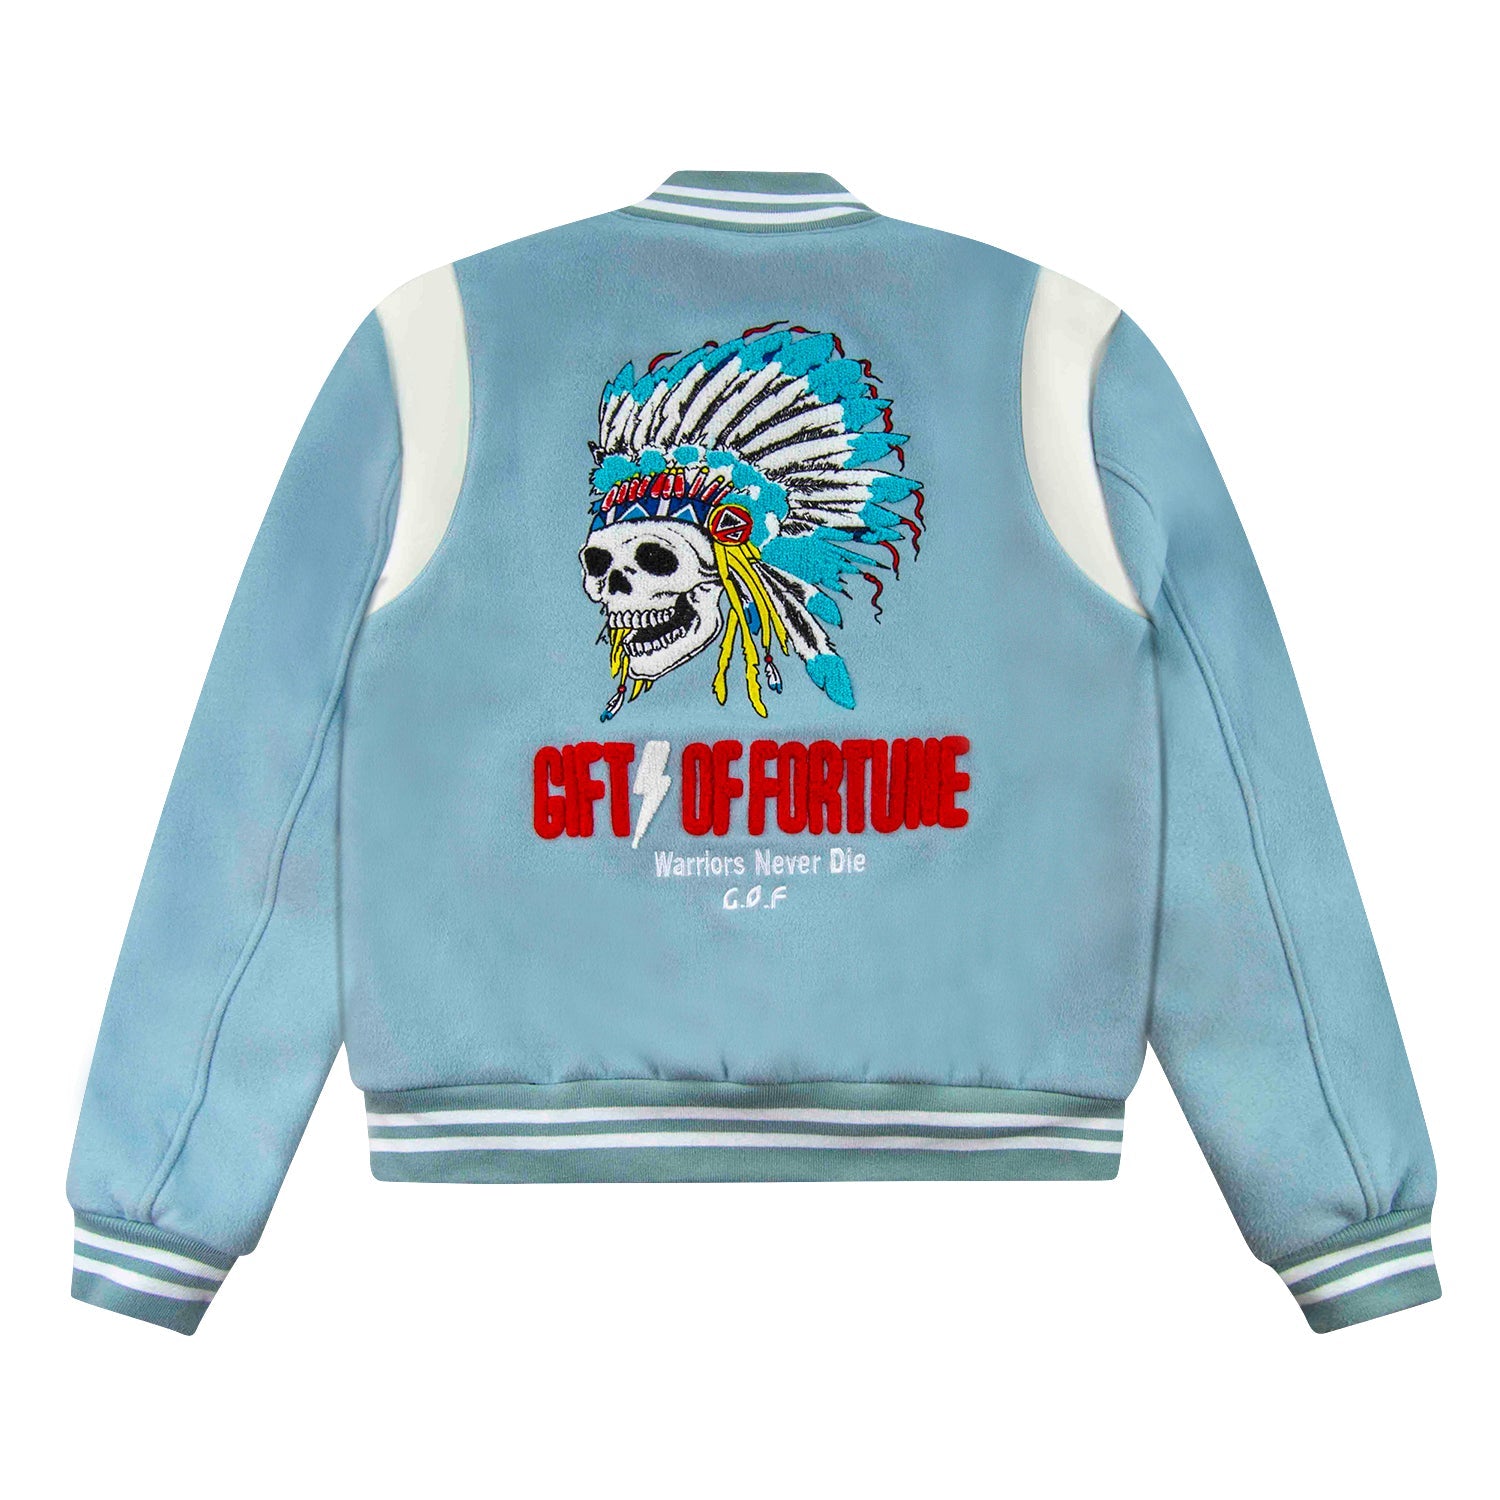 Our Highly Anticipated Sky Blue "Never Die" Varsity!!! will be available 1/24